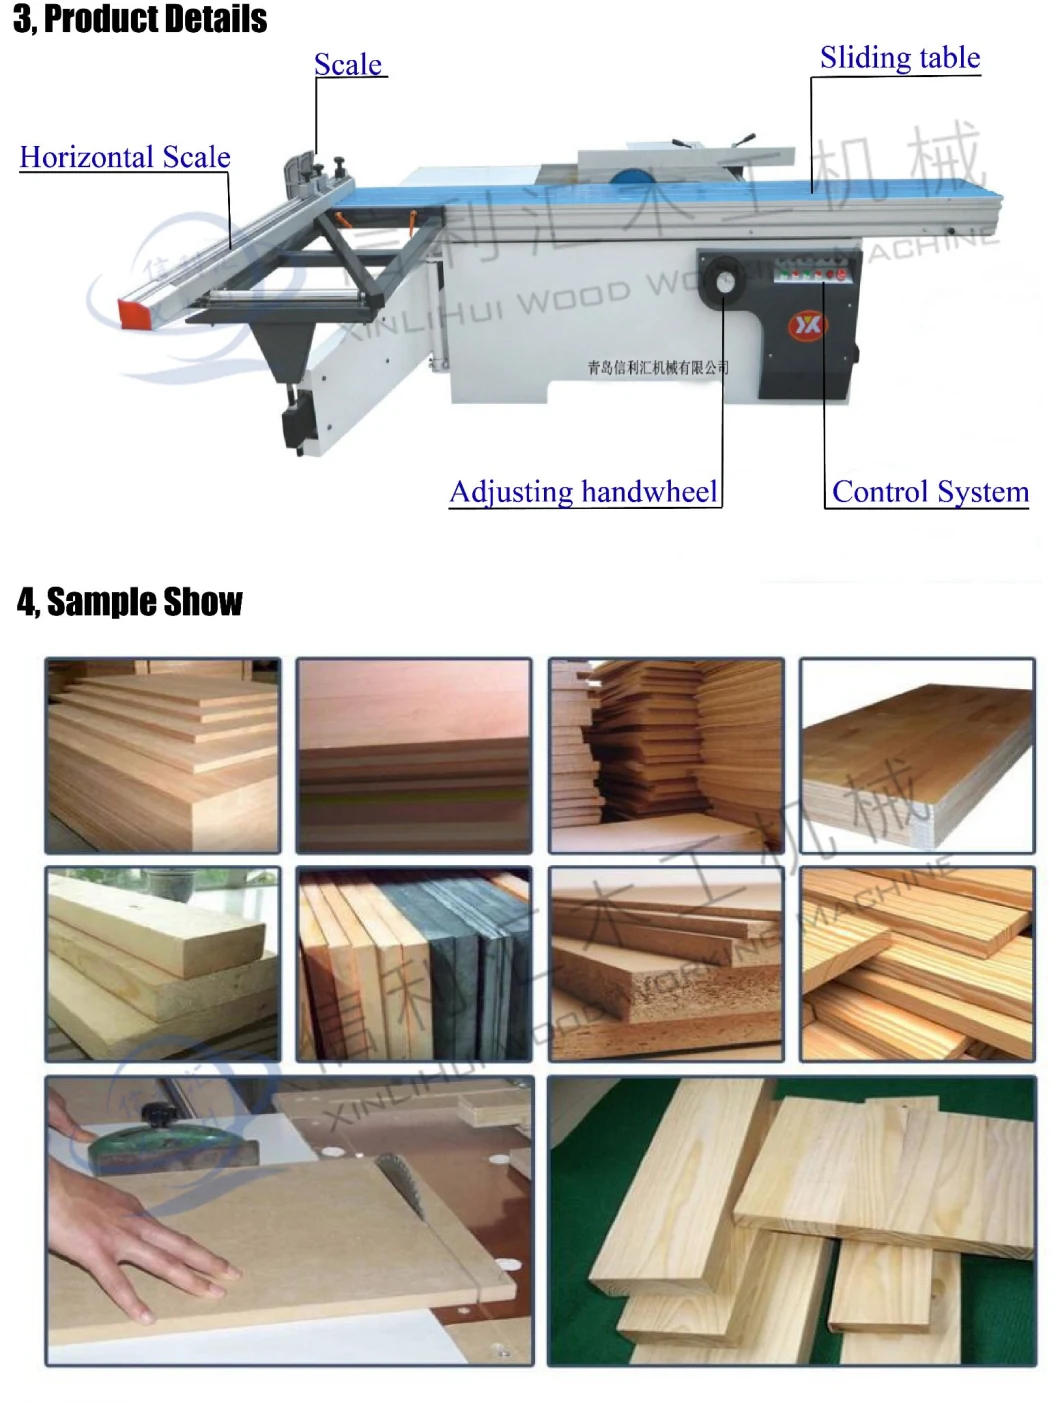 Full Specs for Fully Automatic Table Saw. Saw Mill, Small Saw Mill Machine, Small Saw Cutting Machine Industrial Machine for Cutting Boards for Woodwork